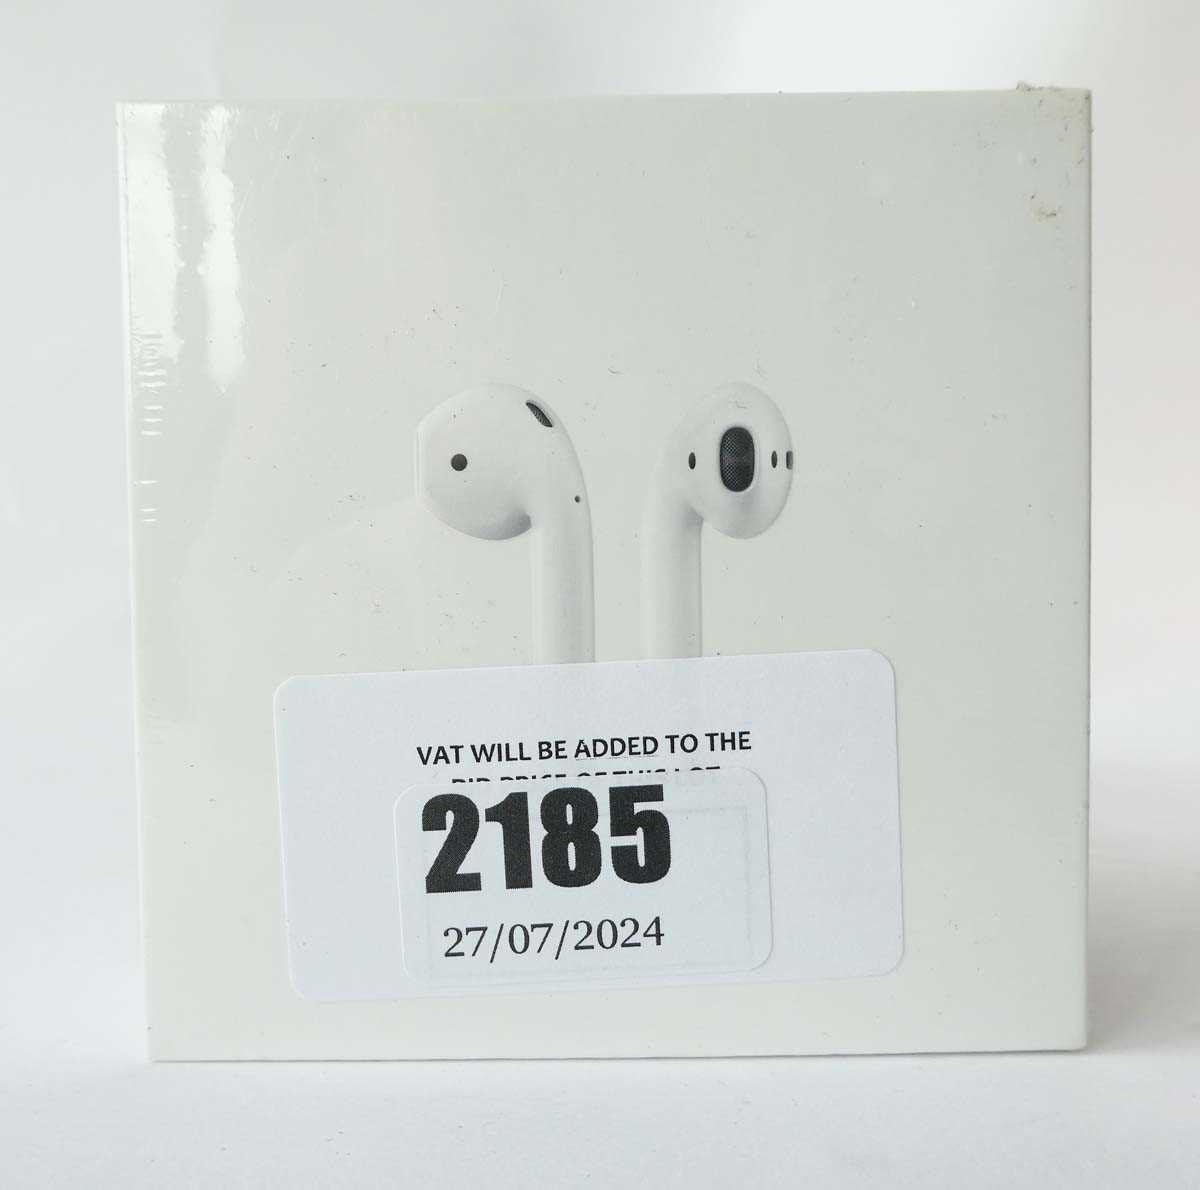 Lot 2185 - *Sealed* AirPods 1st Gen